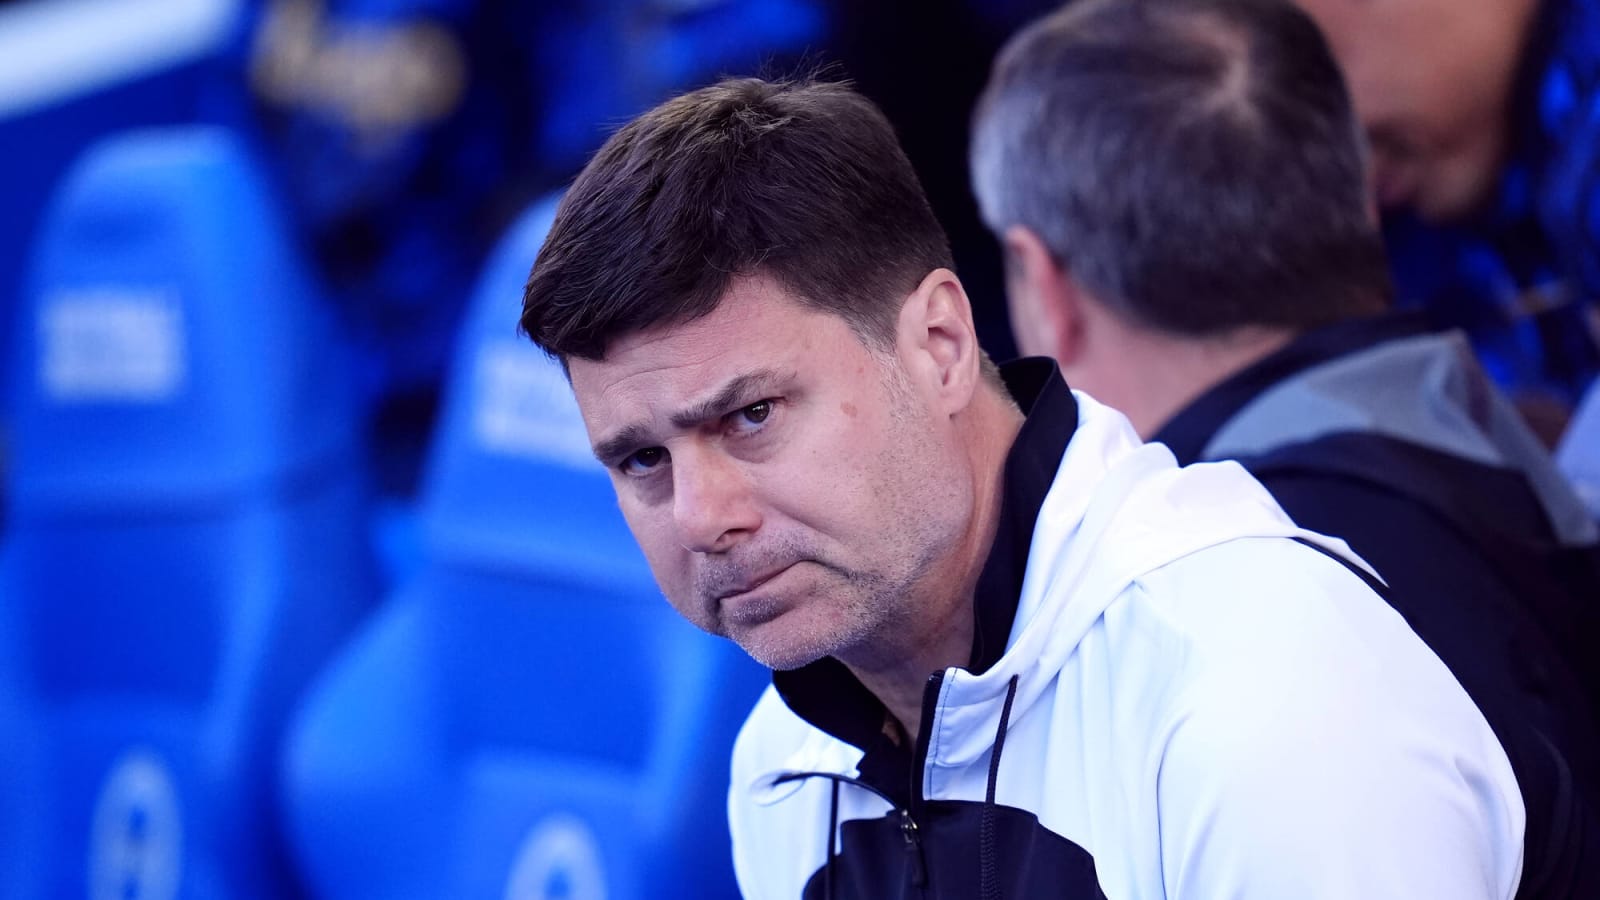 Journalist spots one thing Chelsea owners did that could suggest Pochettino decision made